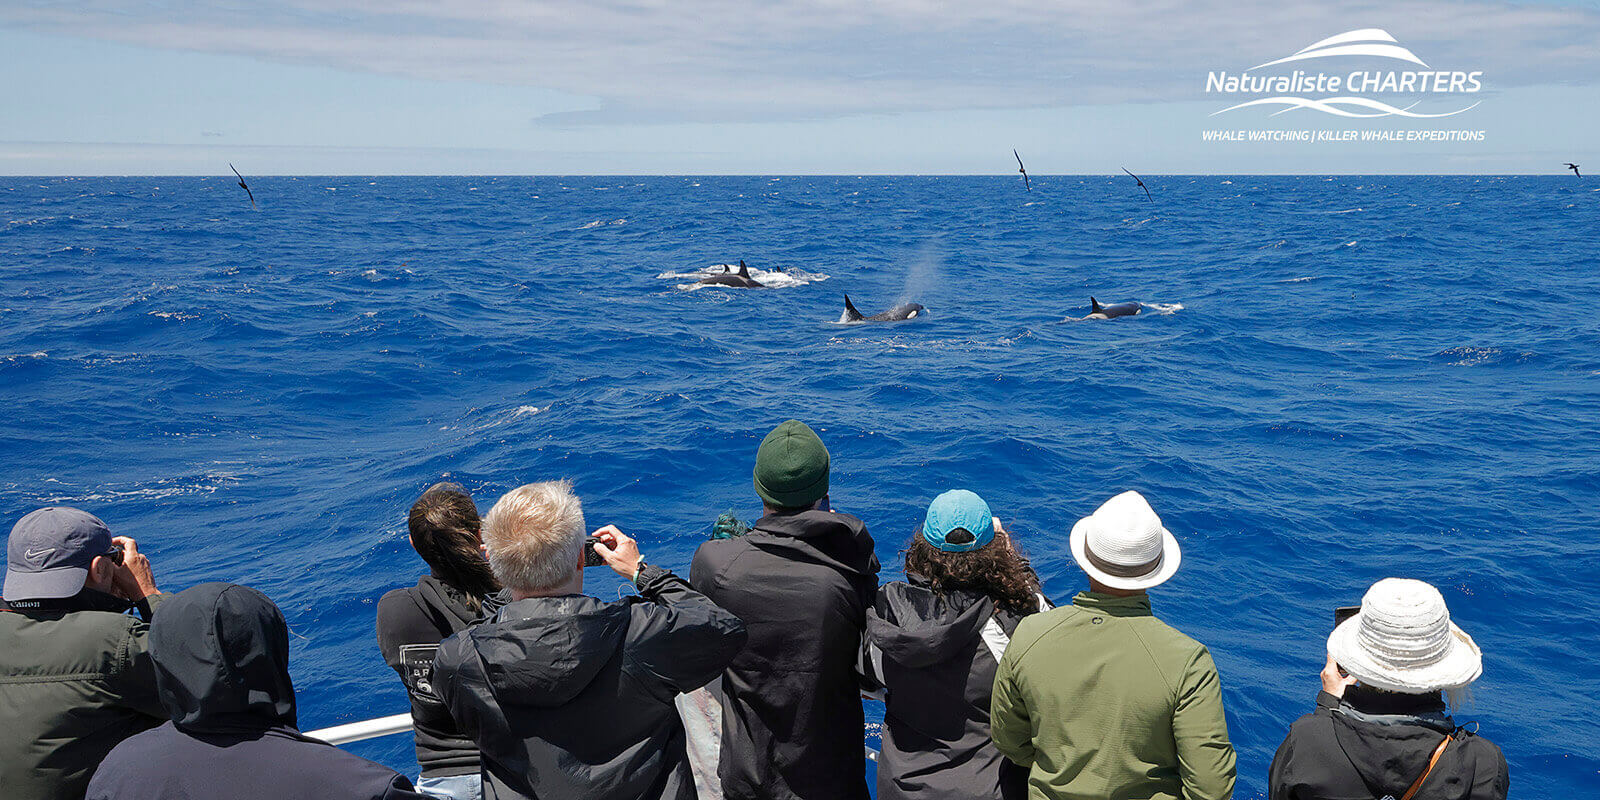 Plan a Whale Watching Experience with Naturaliste Charters